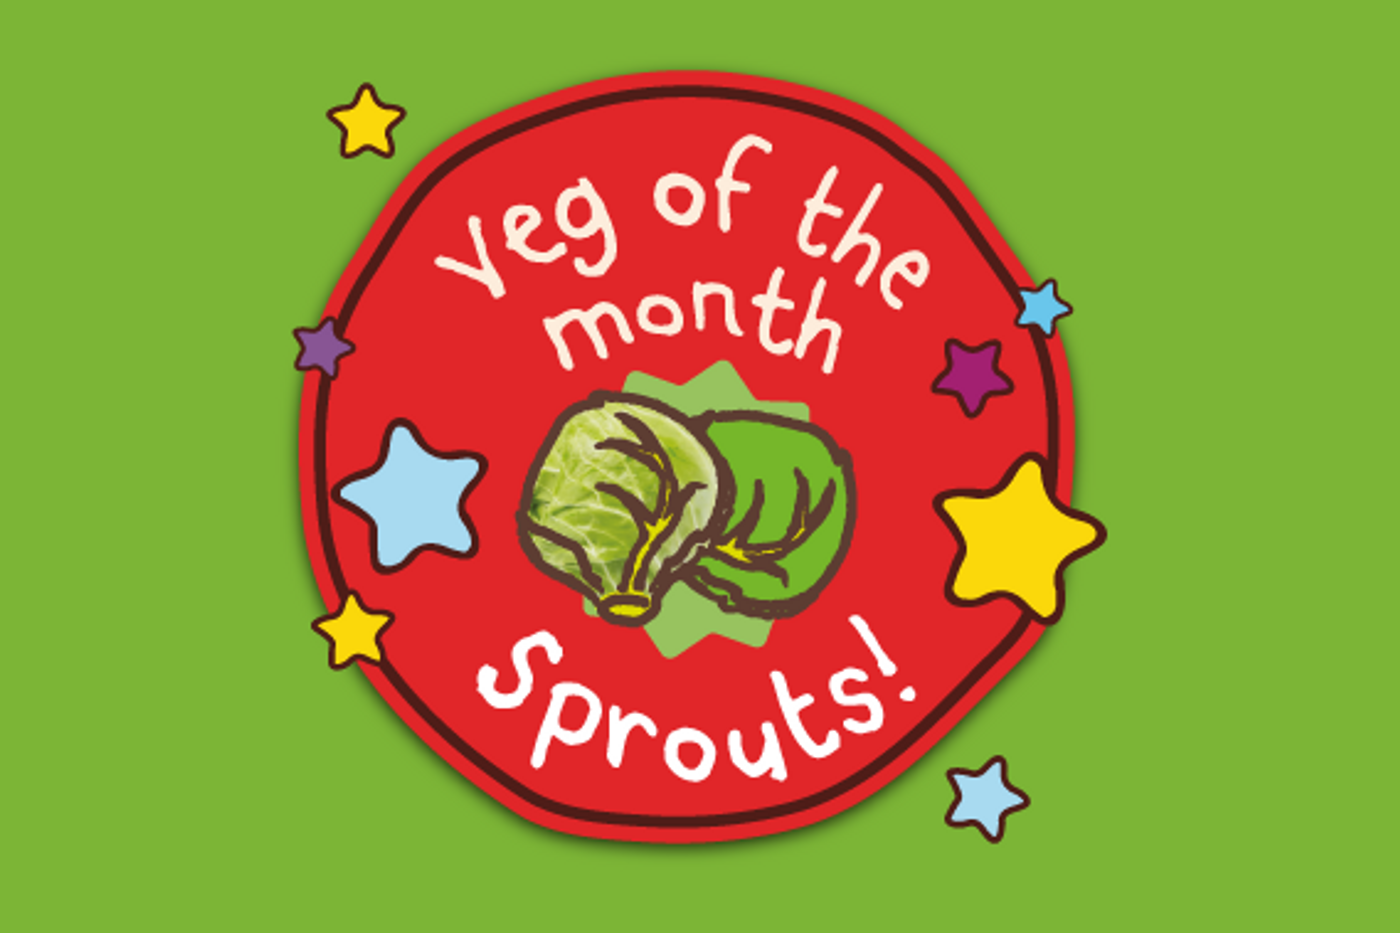 Veg of the month Sprout 568x380